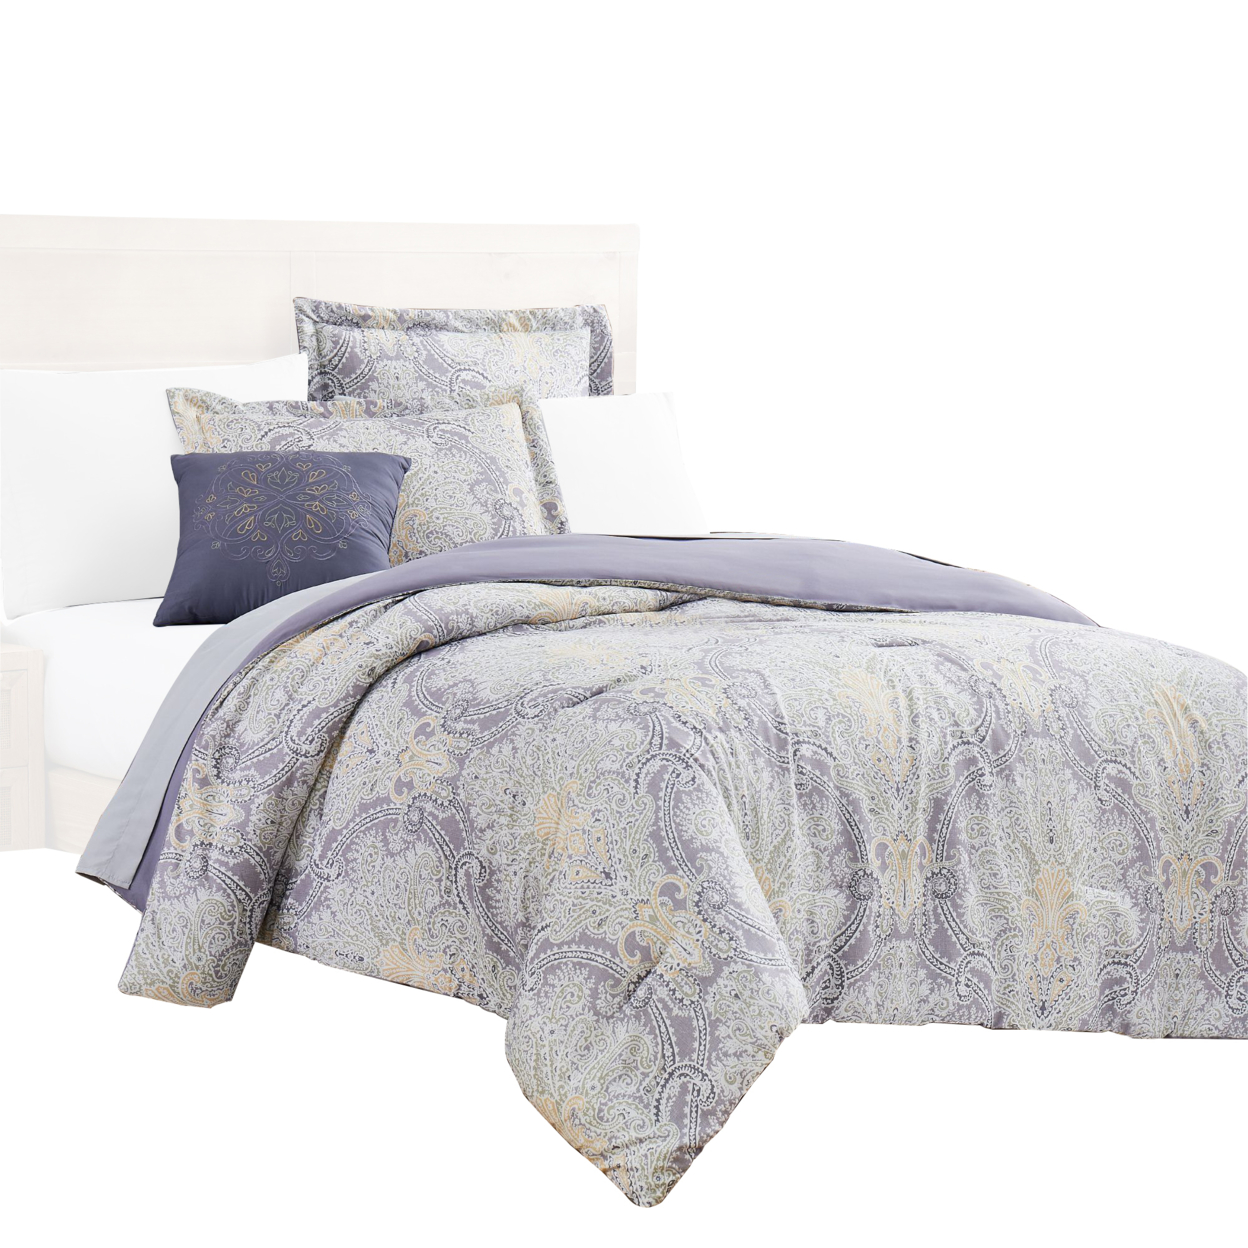 Chania 8 Piece Queen Bed Set With Paisley Print The Urban Port, Purple And White- Saltoro Sherpi